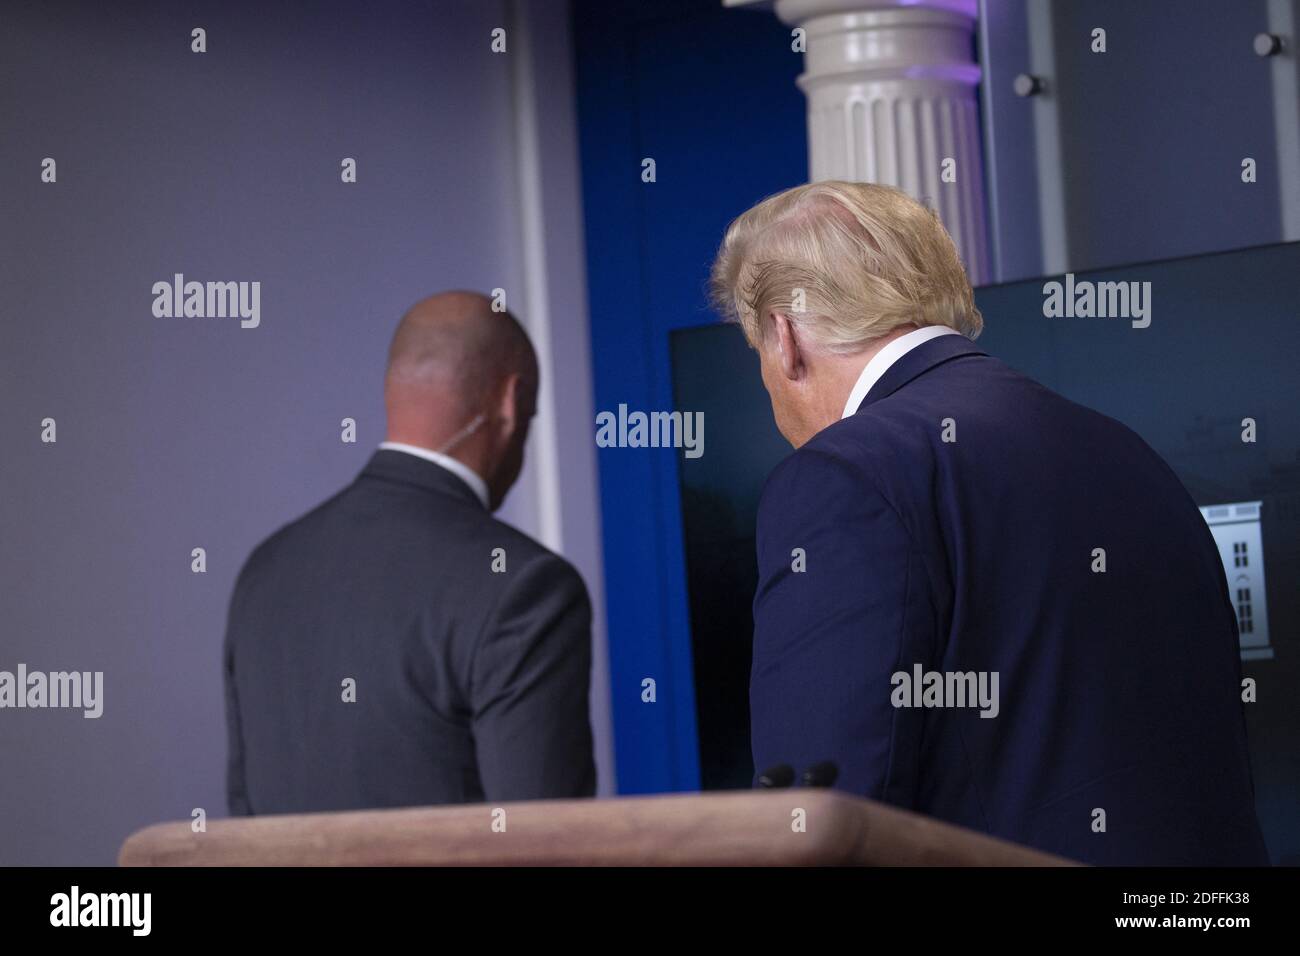 United States President Donald J. Trump is removed from the White House Briefing Room by a US Secret Service agent during a press conference in Washington, DC, USA, on Monday, August 10, 2020. Photo by Stefani Reynolds/Pool via CNP/ABACAPRESS.COM Stock Photo